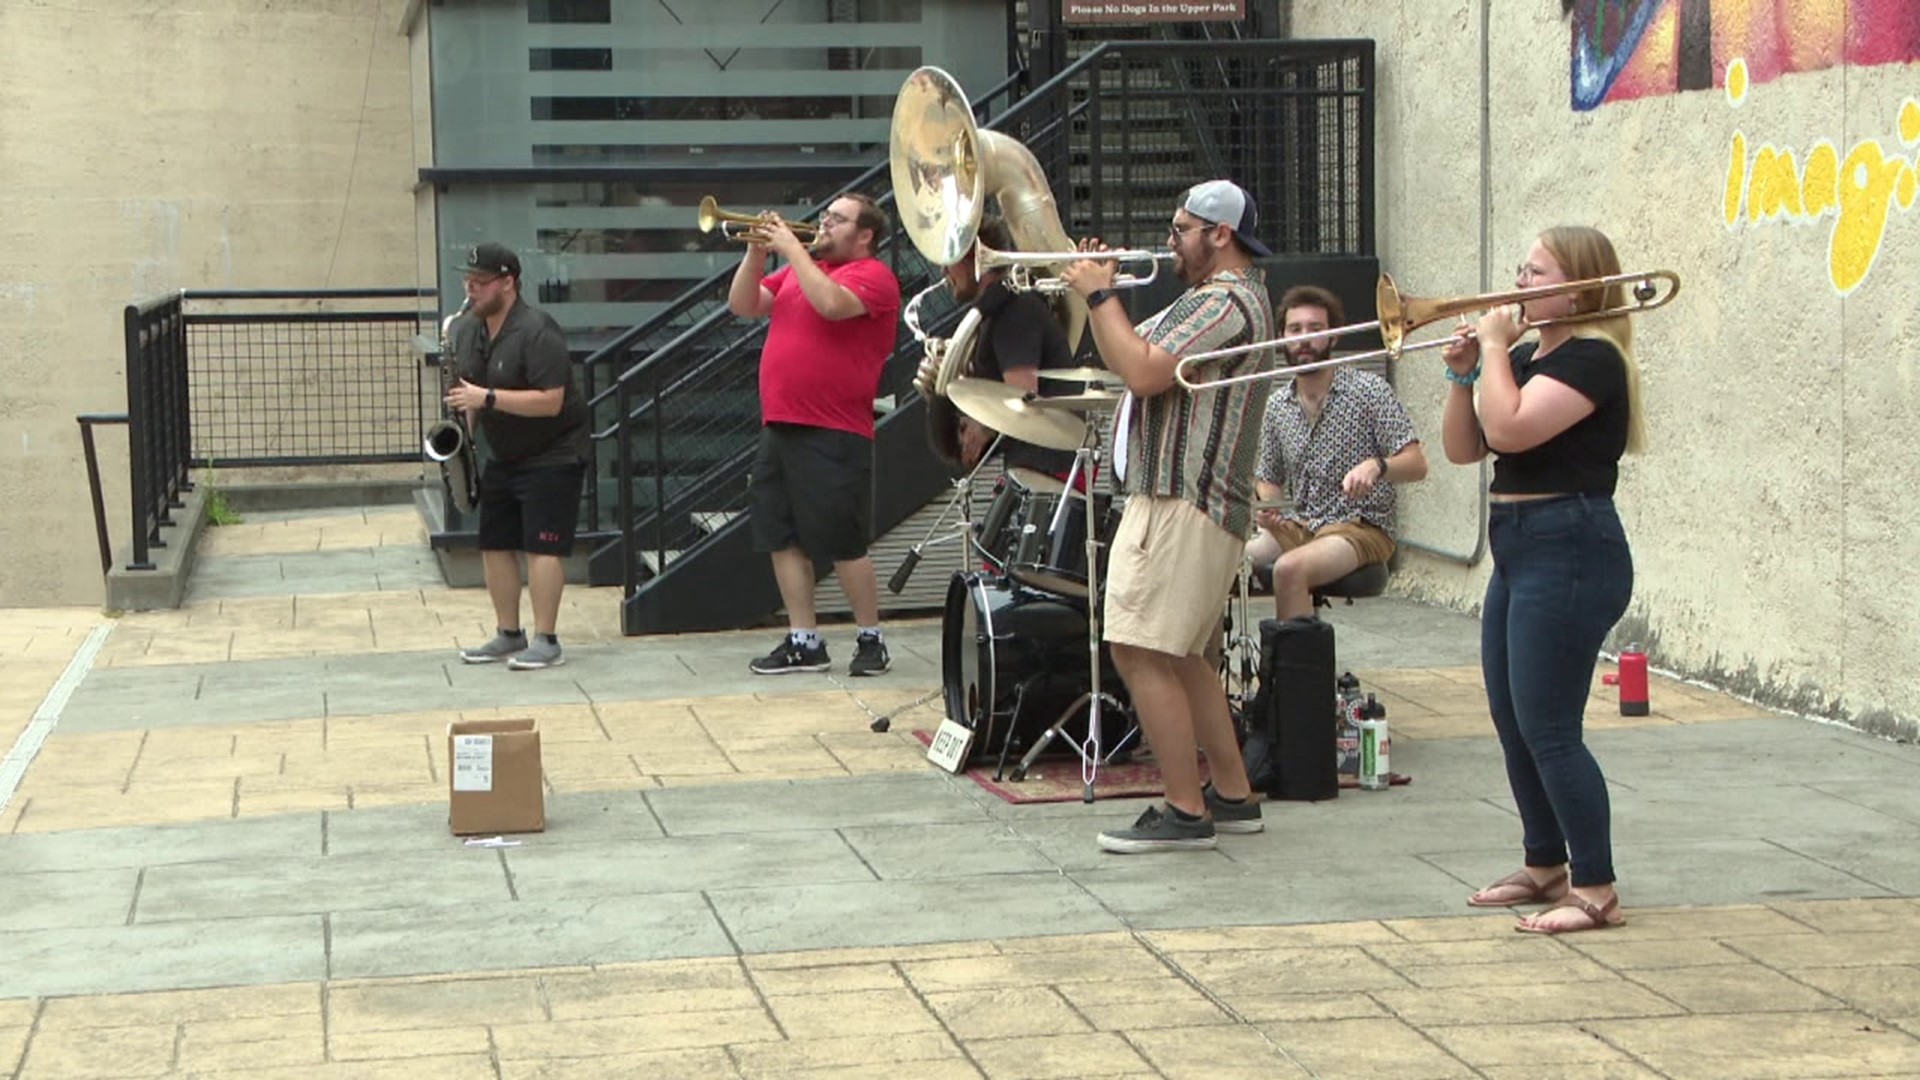 The sound of jazz music is filling the streets of Scranton this weekend, with Friday night's kick-off getting music lovers to explore the downtown.